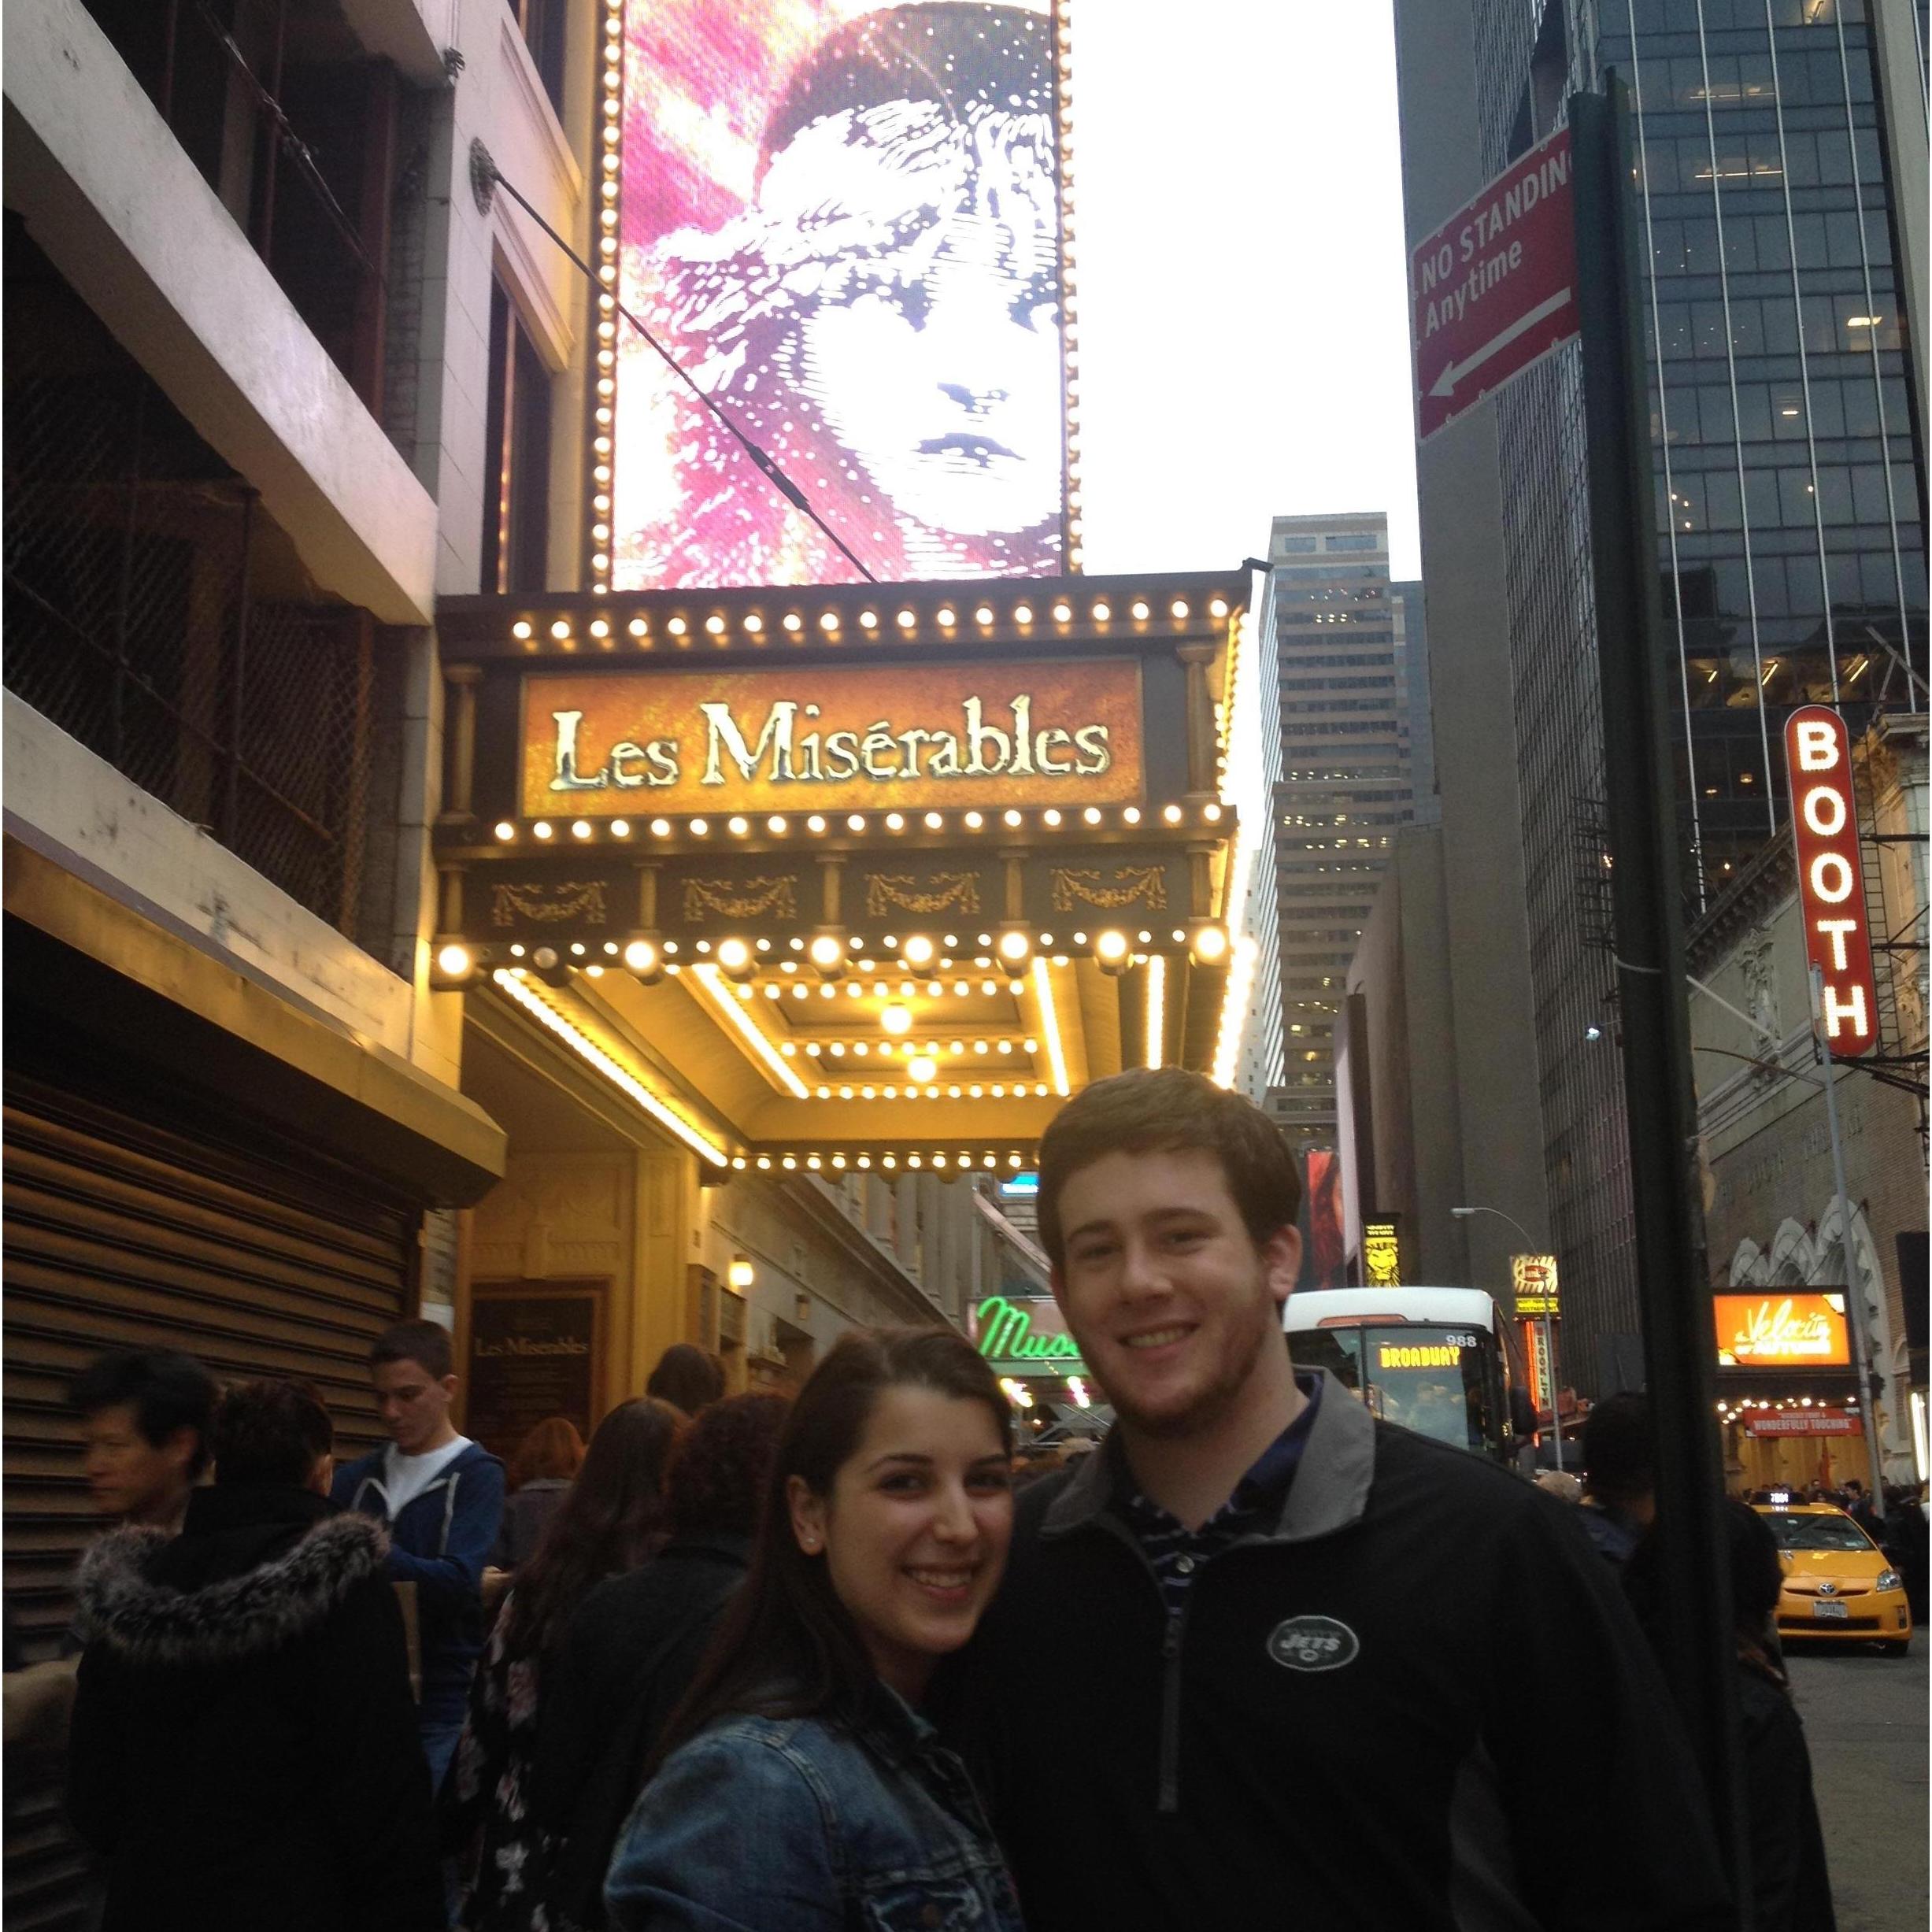 Our first Broadway show together!